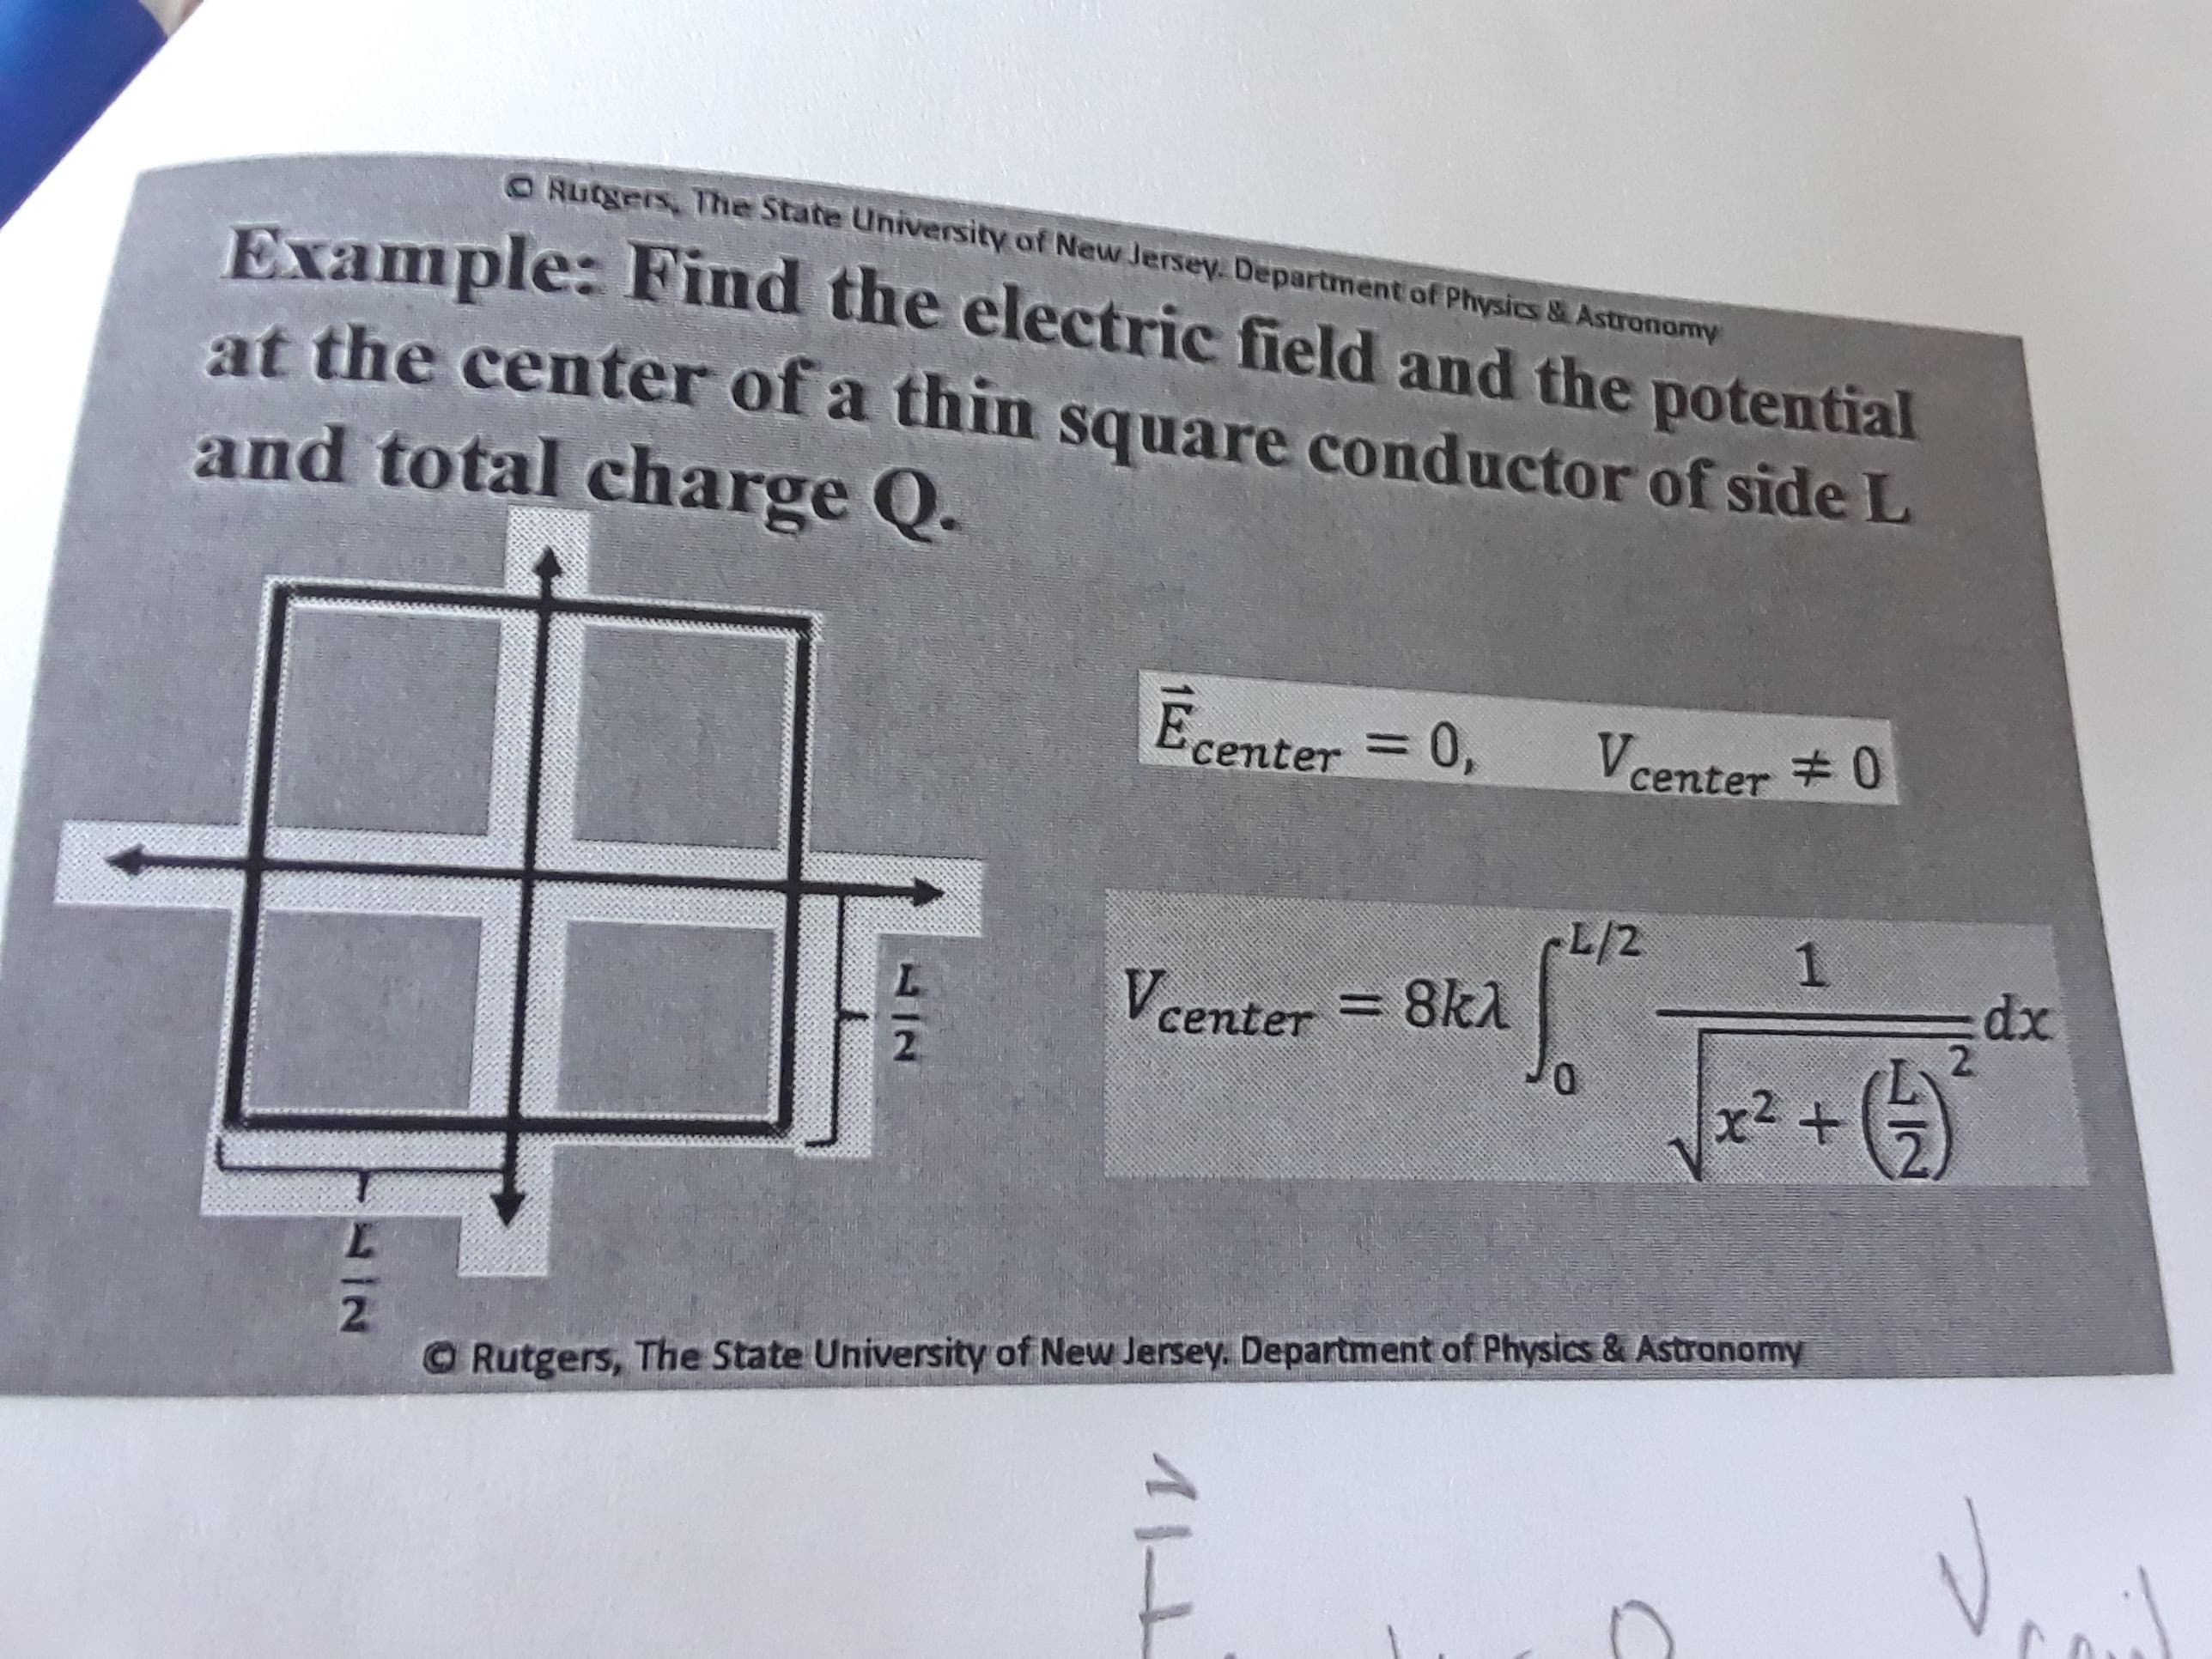 O Rutgers, The State University of New Jersey. Department of Physics&Astronormy
Example: Find the electric field and the potential
at the center of a thin square conductor of side L
and total charge Q.
Ecenter 0,
Vcenter 0
L/2
8k1
1
xp
:dx
2.
center=
2
+
r2
2
O Rutgers, The State University of New Jersey. Department of Physics & Astranomy
